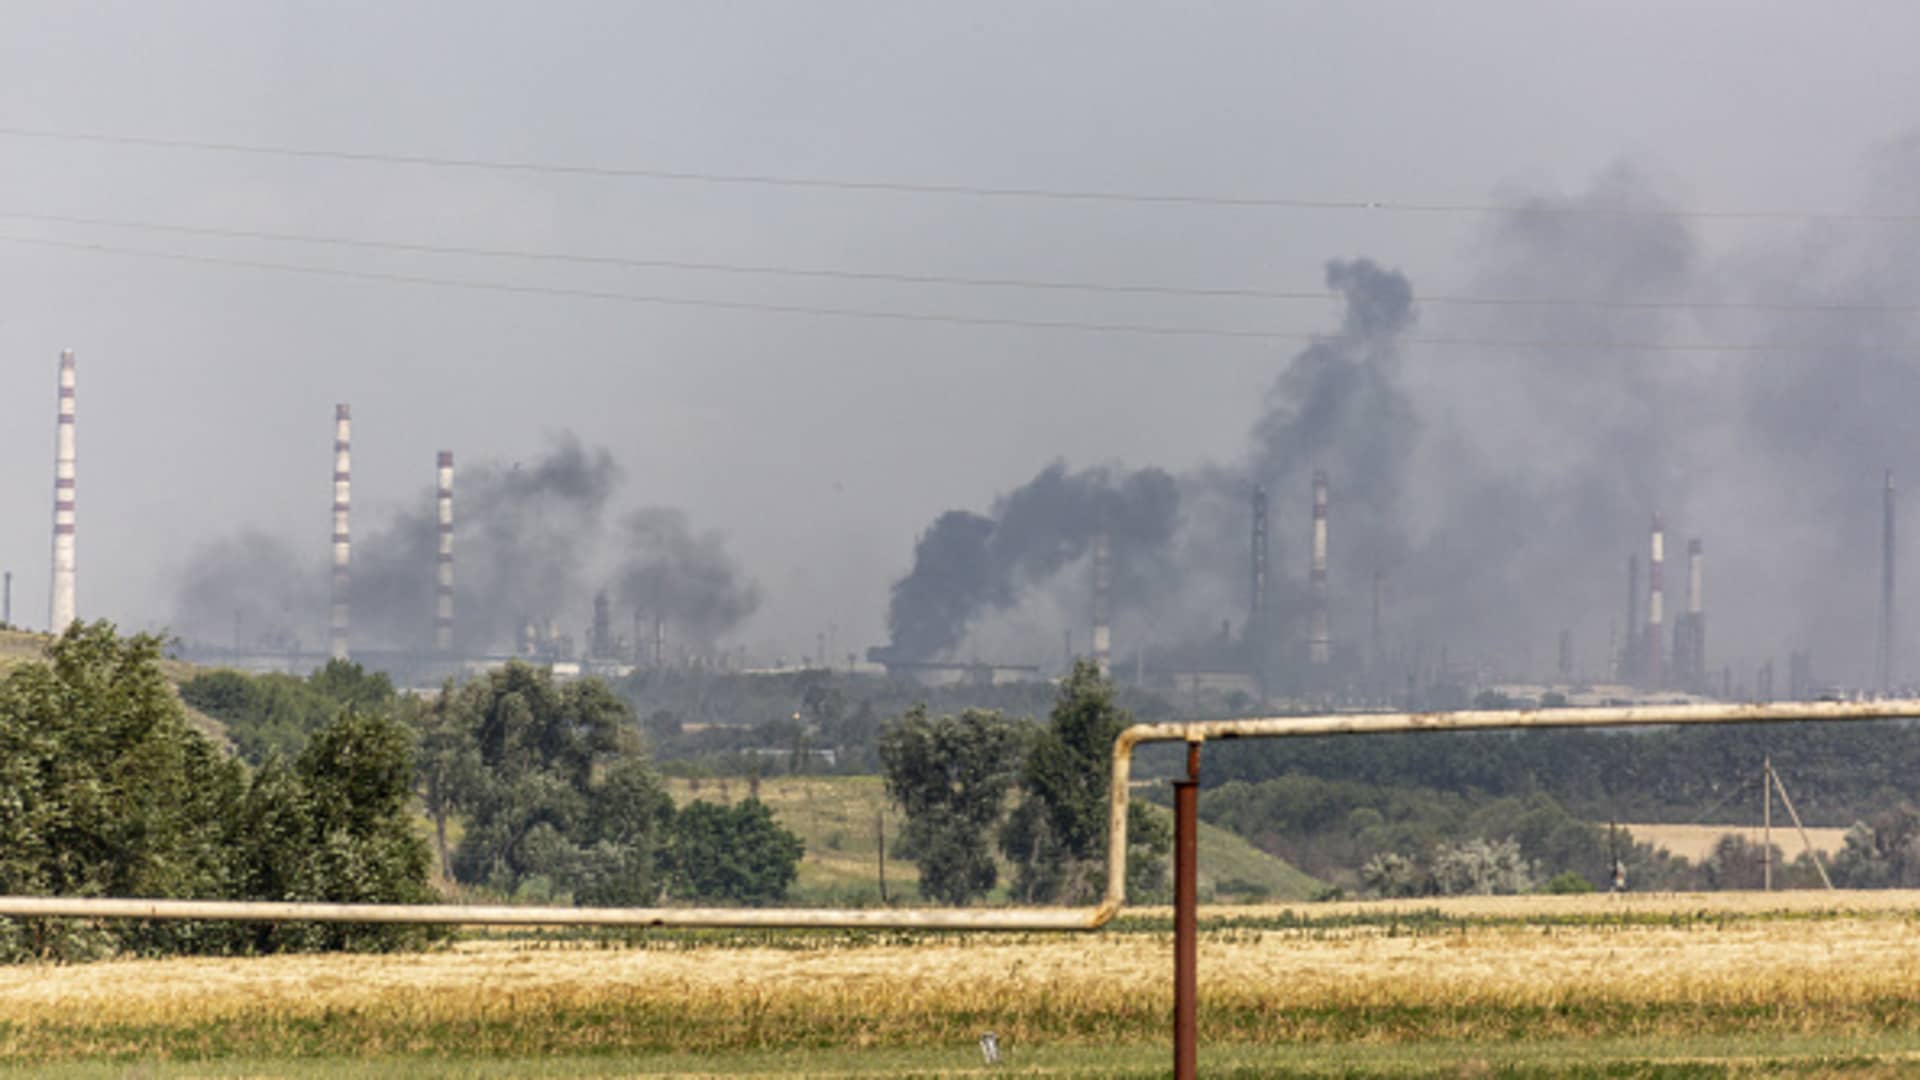 Plumes of smoke rising to the sky during heavy fighting between Ukrainian and Russian forces in Lysychansk, Ukraine, on July 1, 2022. Russia claimed it had captured Lysychansk on Sunday, a development later confirmed by Ukraine.